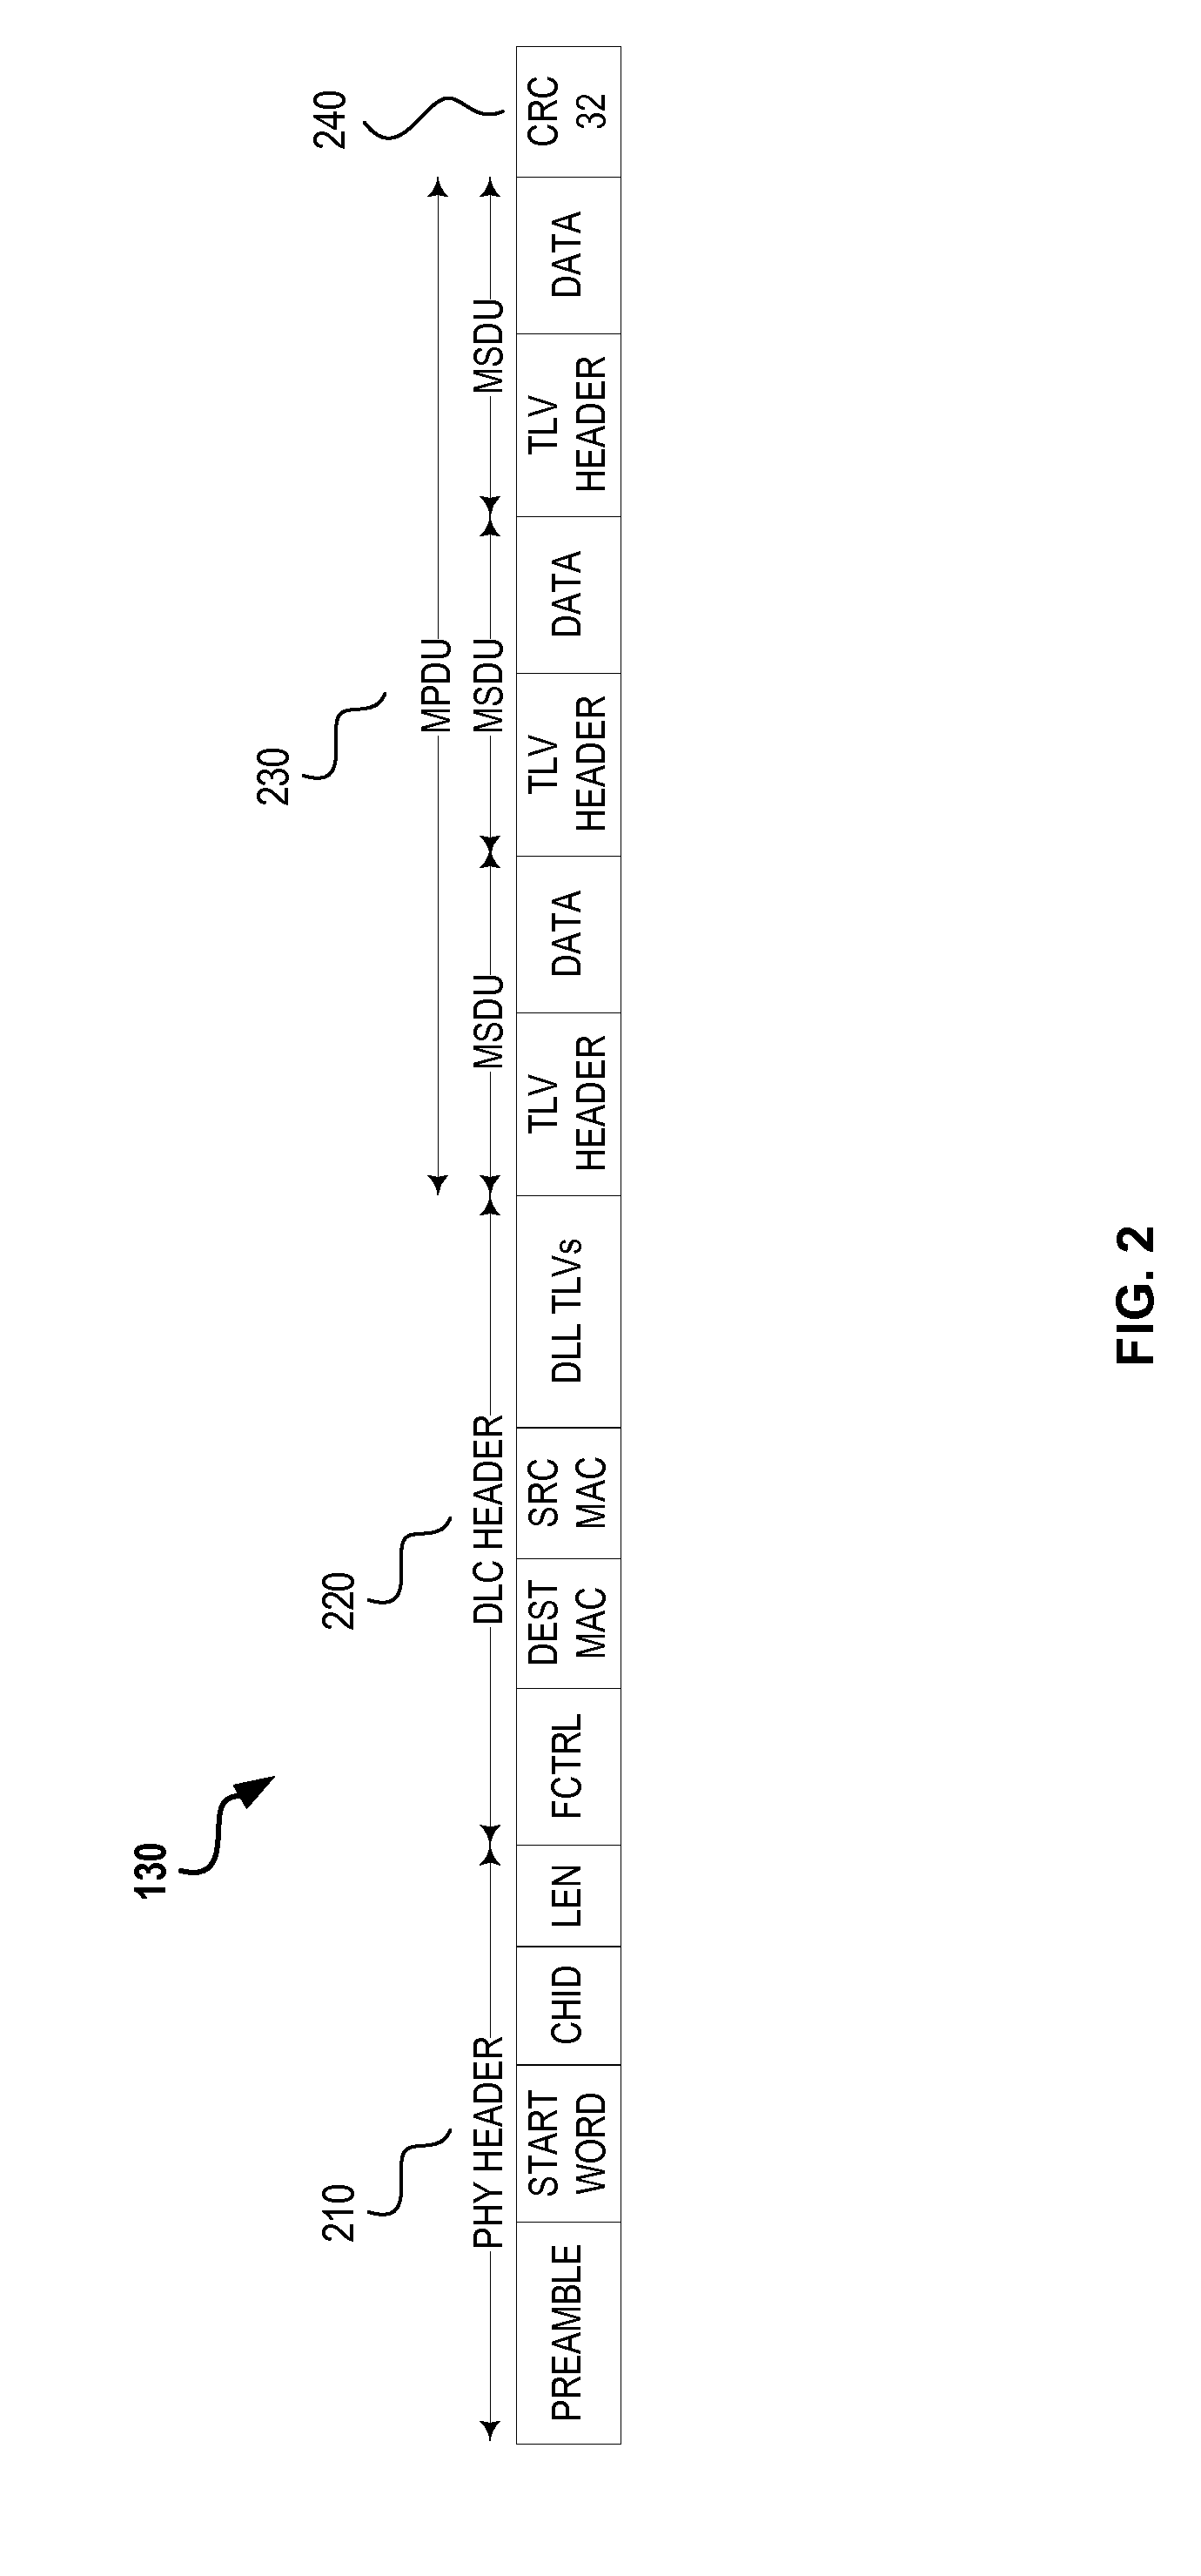 Methods and systems for dynamically configuring and managing communication network nodes at the mac sublayer